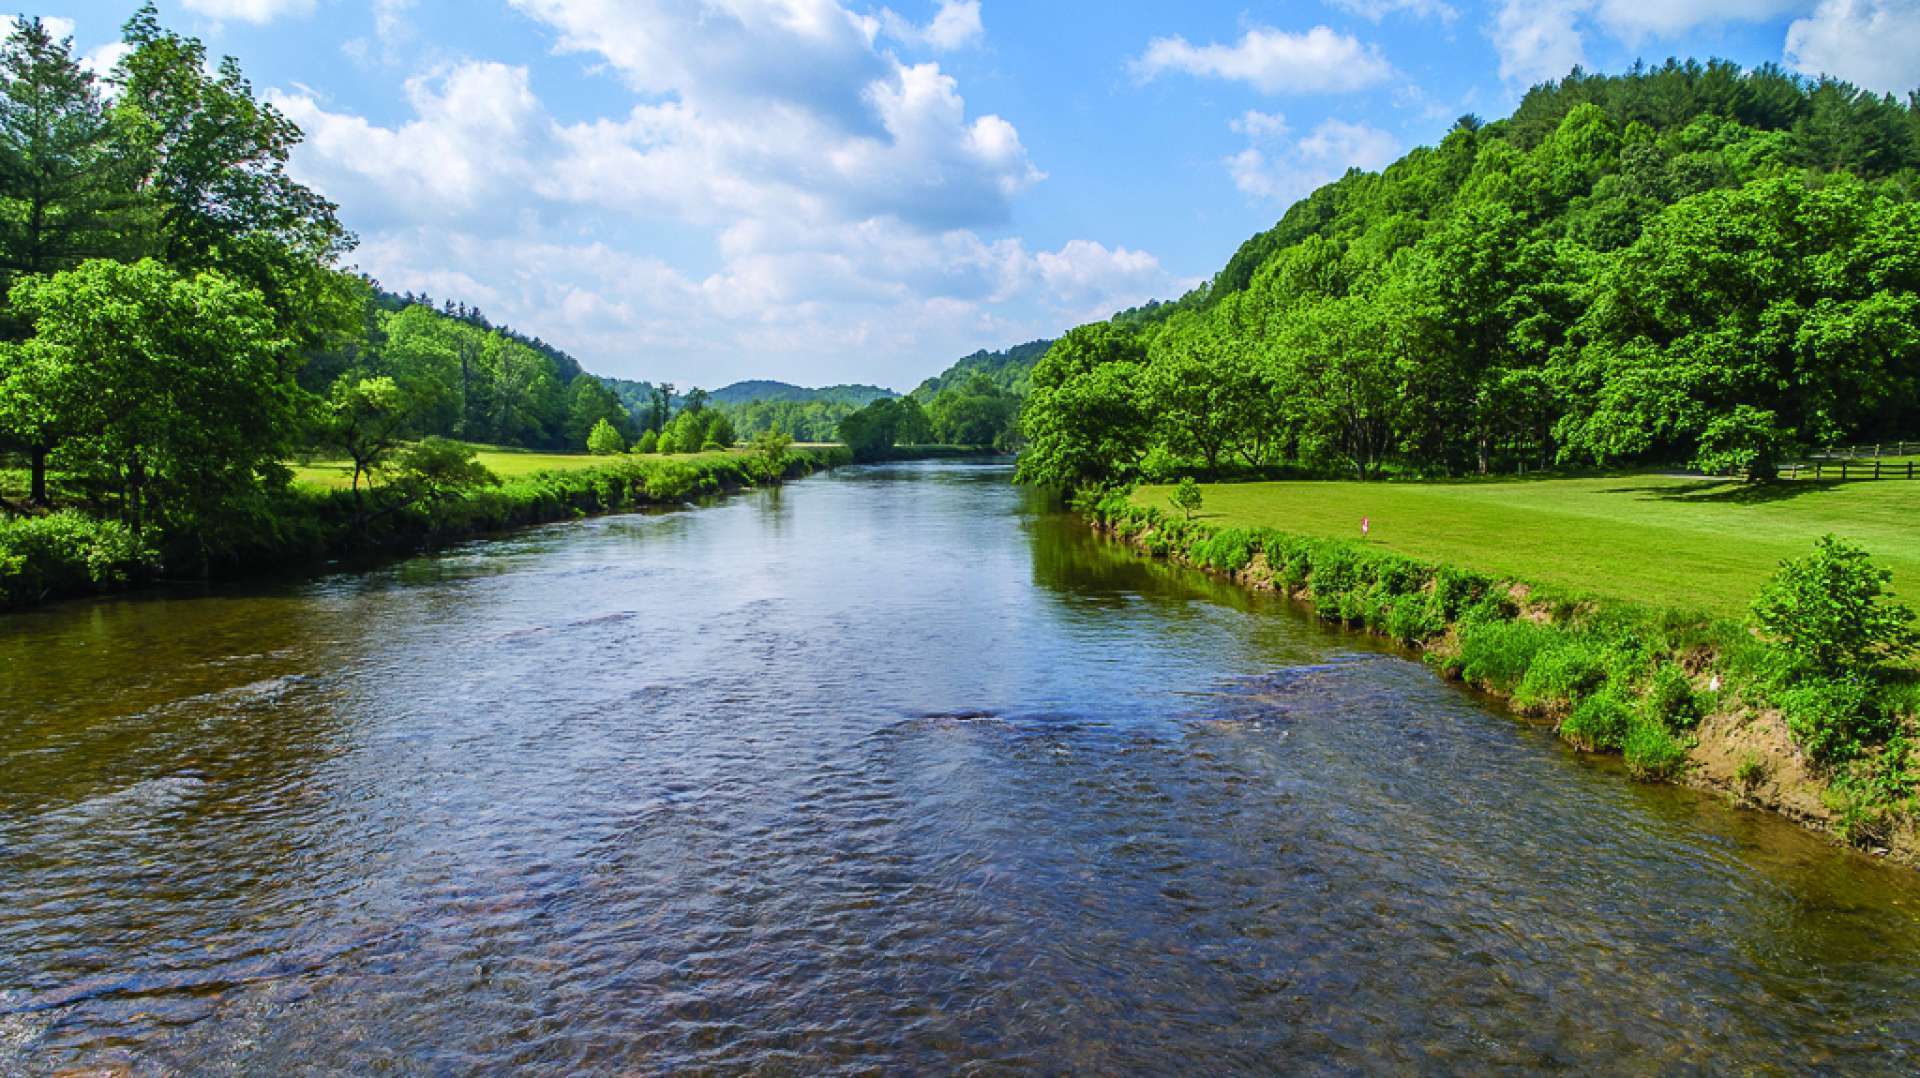 Enjoy 38.78 acres of unspoiled beauty from the banks of the river to the forested ridges with long range layered mountain views. The river frontage is level and expansive creating many options for this gorgeous property.